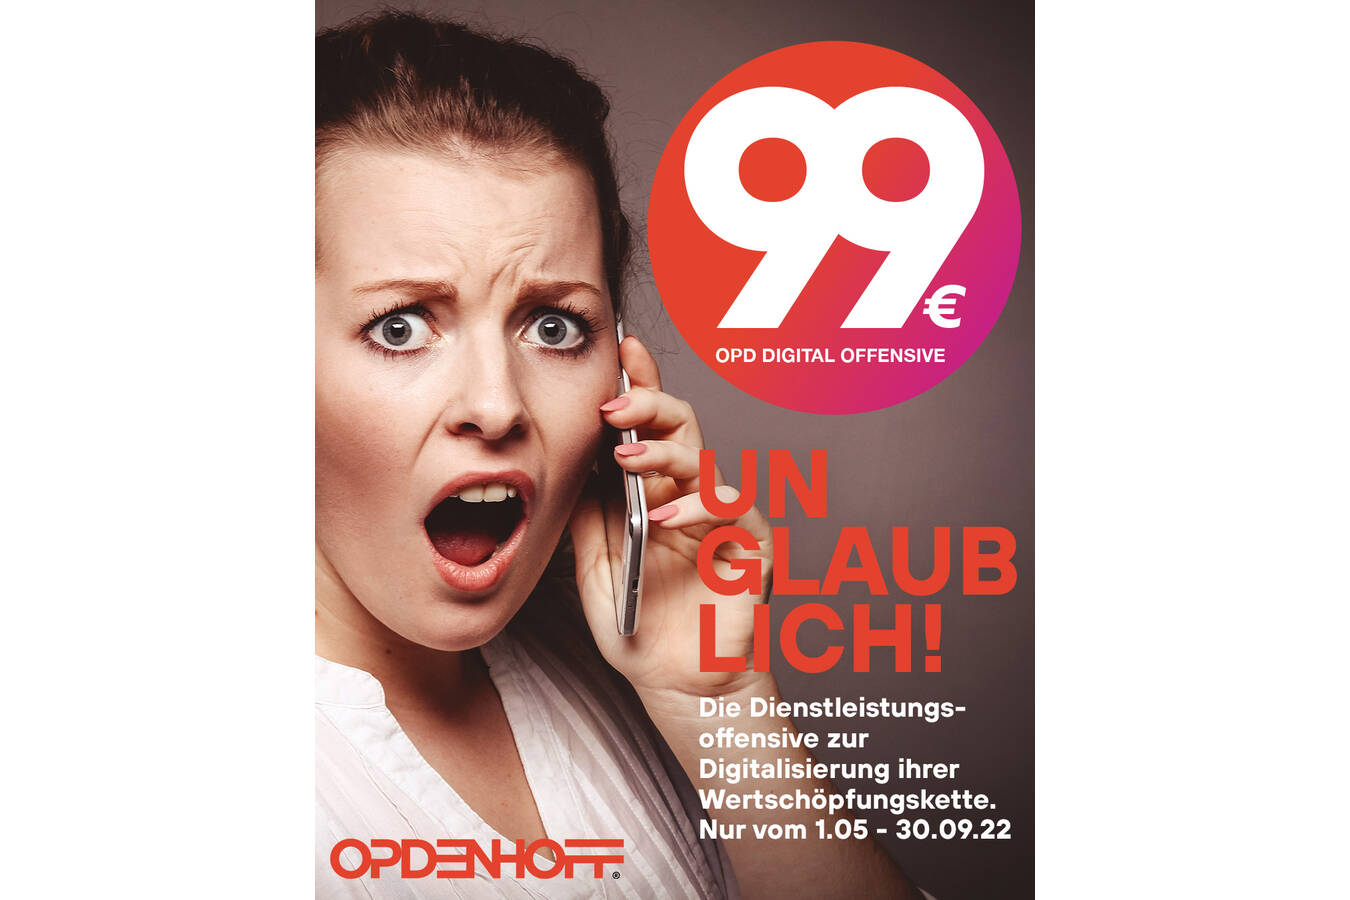 OPDENHOFF Digitalisation Campaign  ’99‘ At first glance, digitalisation raises many questions - but in reality it provides the answers and solutions for all decision-making processes in their value creation.